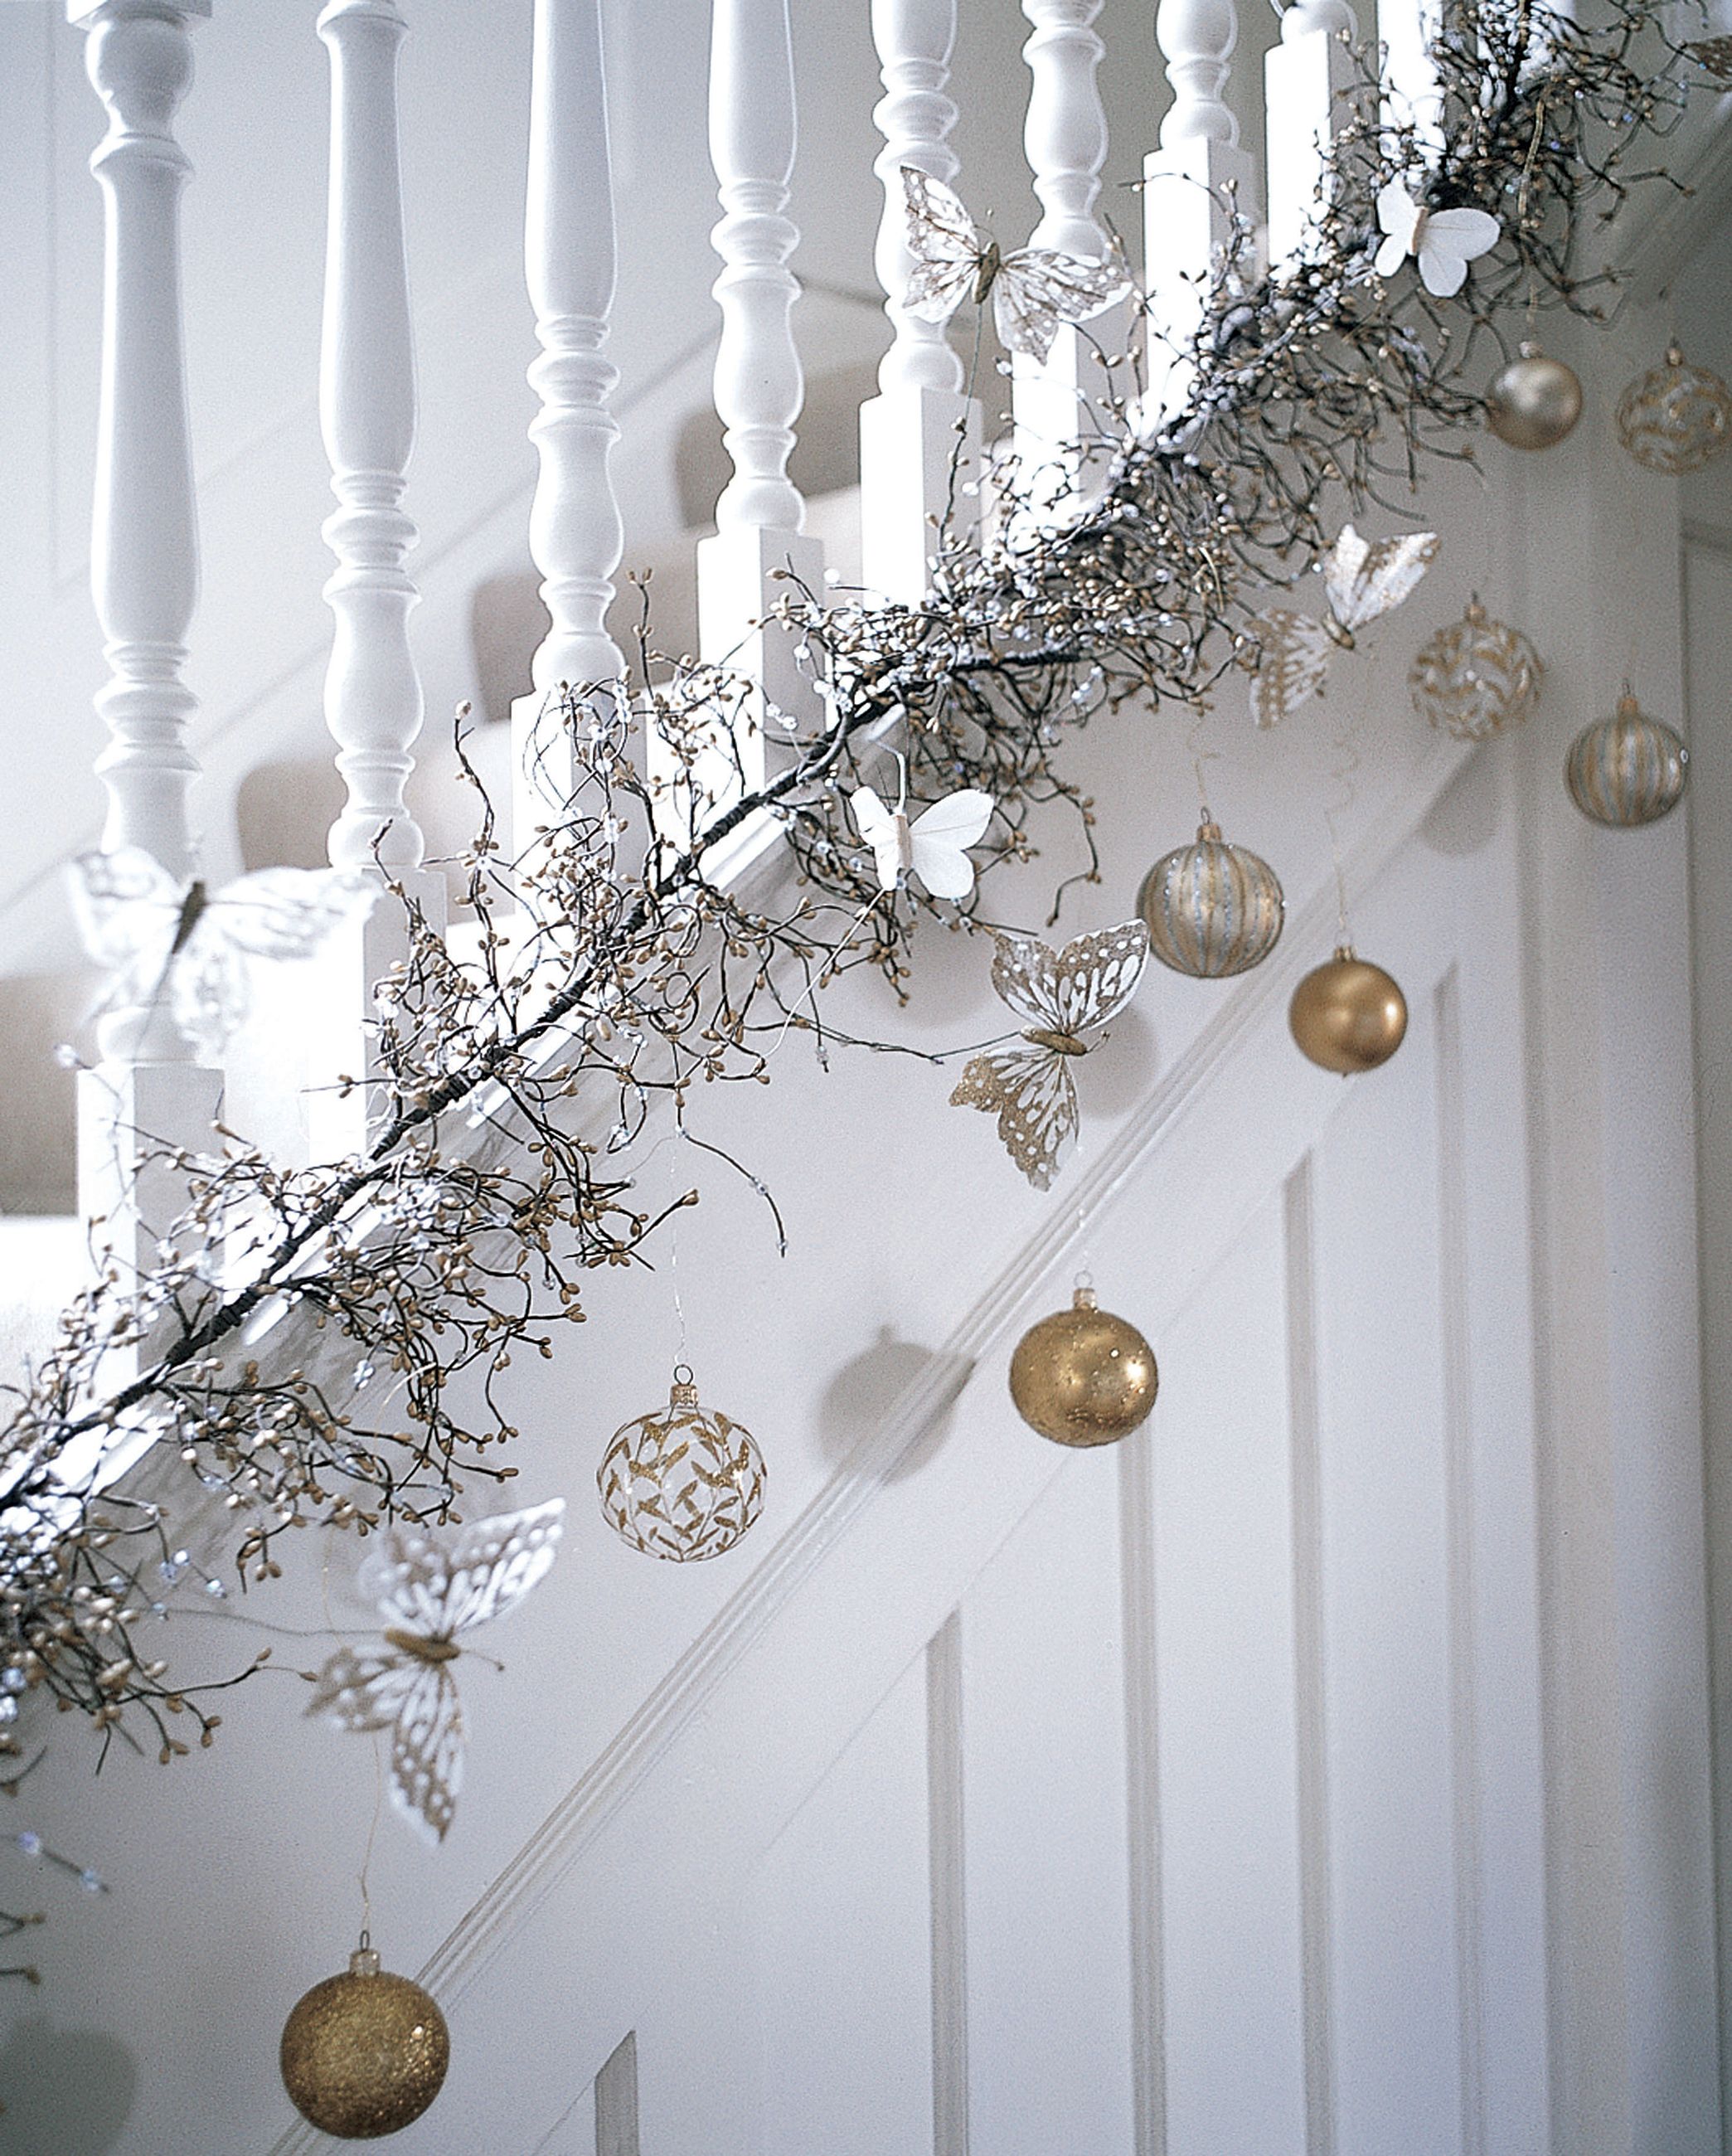 34 Top Christmas Stairway Decor Ideas - Christmas Staircase Decorating Tips